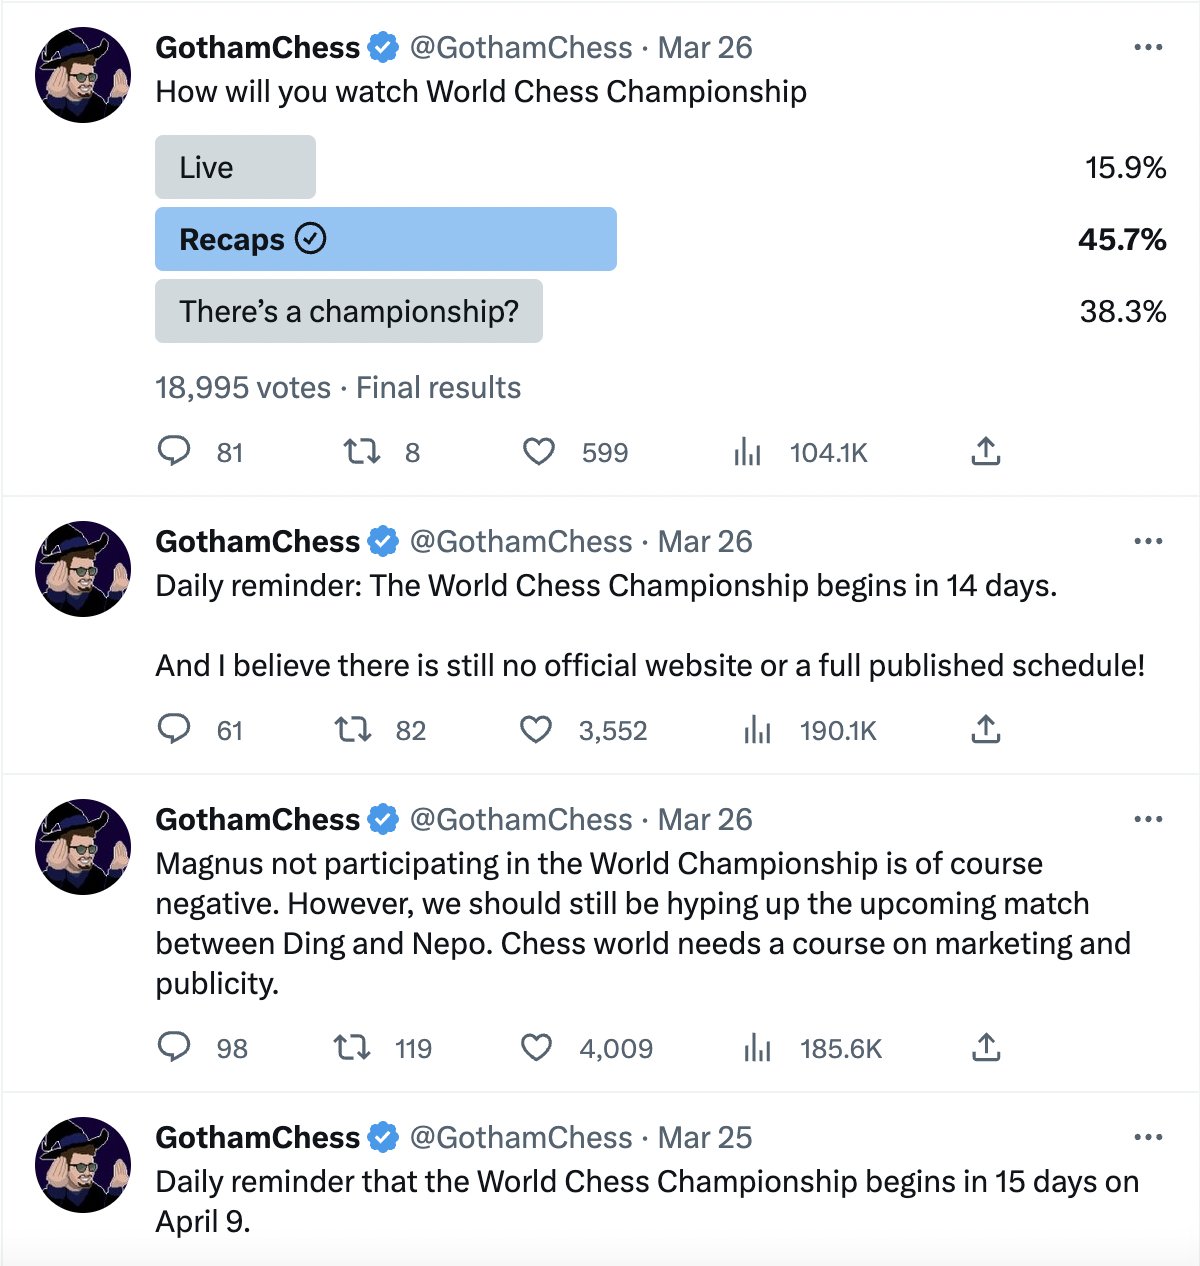 Women's Chess Coverage on X: Not to mention, over 500K people have watched  the Candidates on the @chesscom broadcast --- even with most chess fans  getting no advance notice that the Candidates